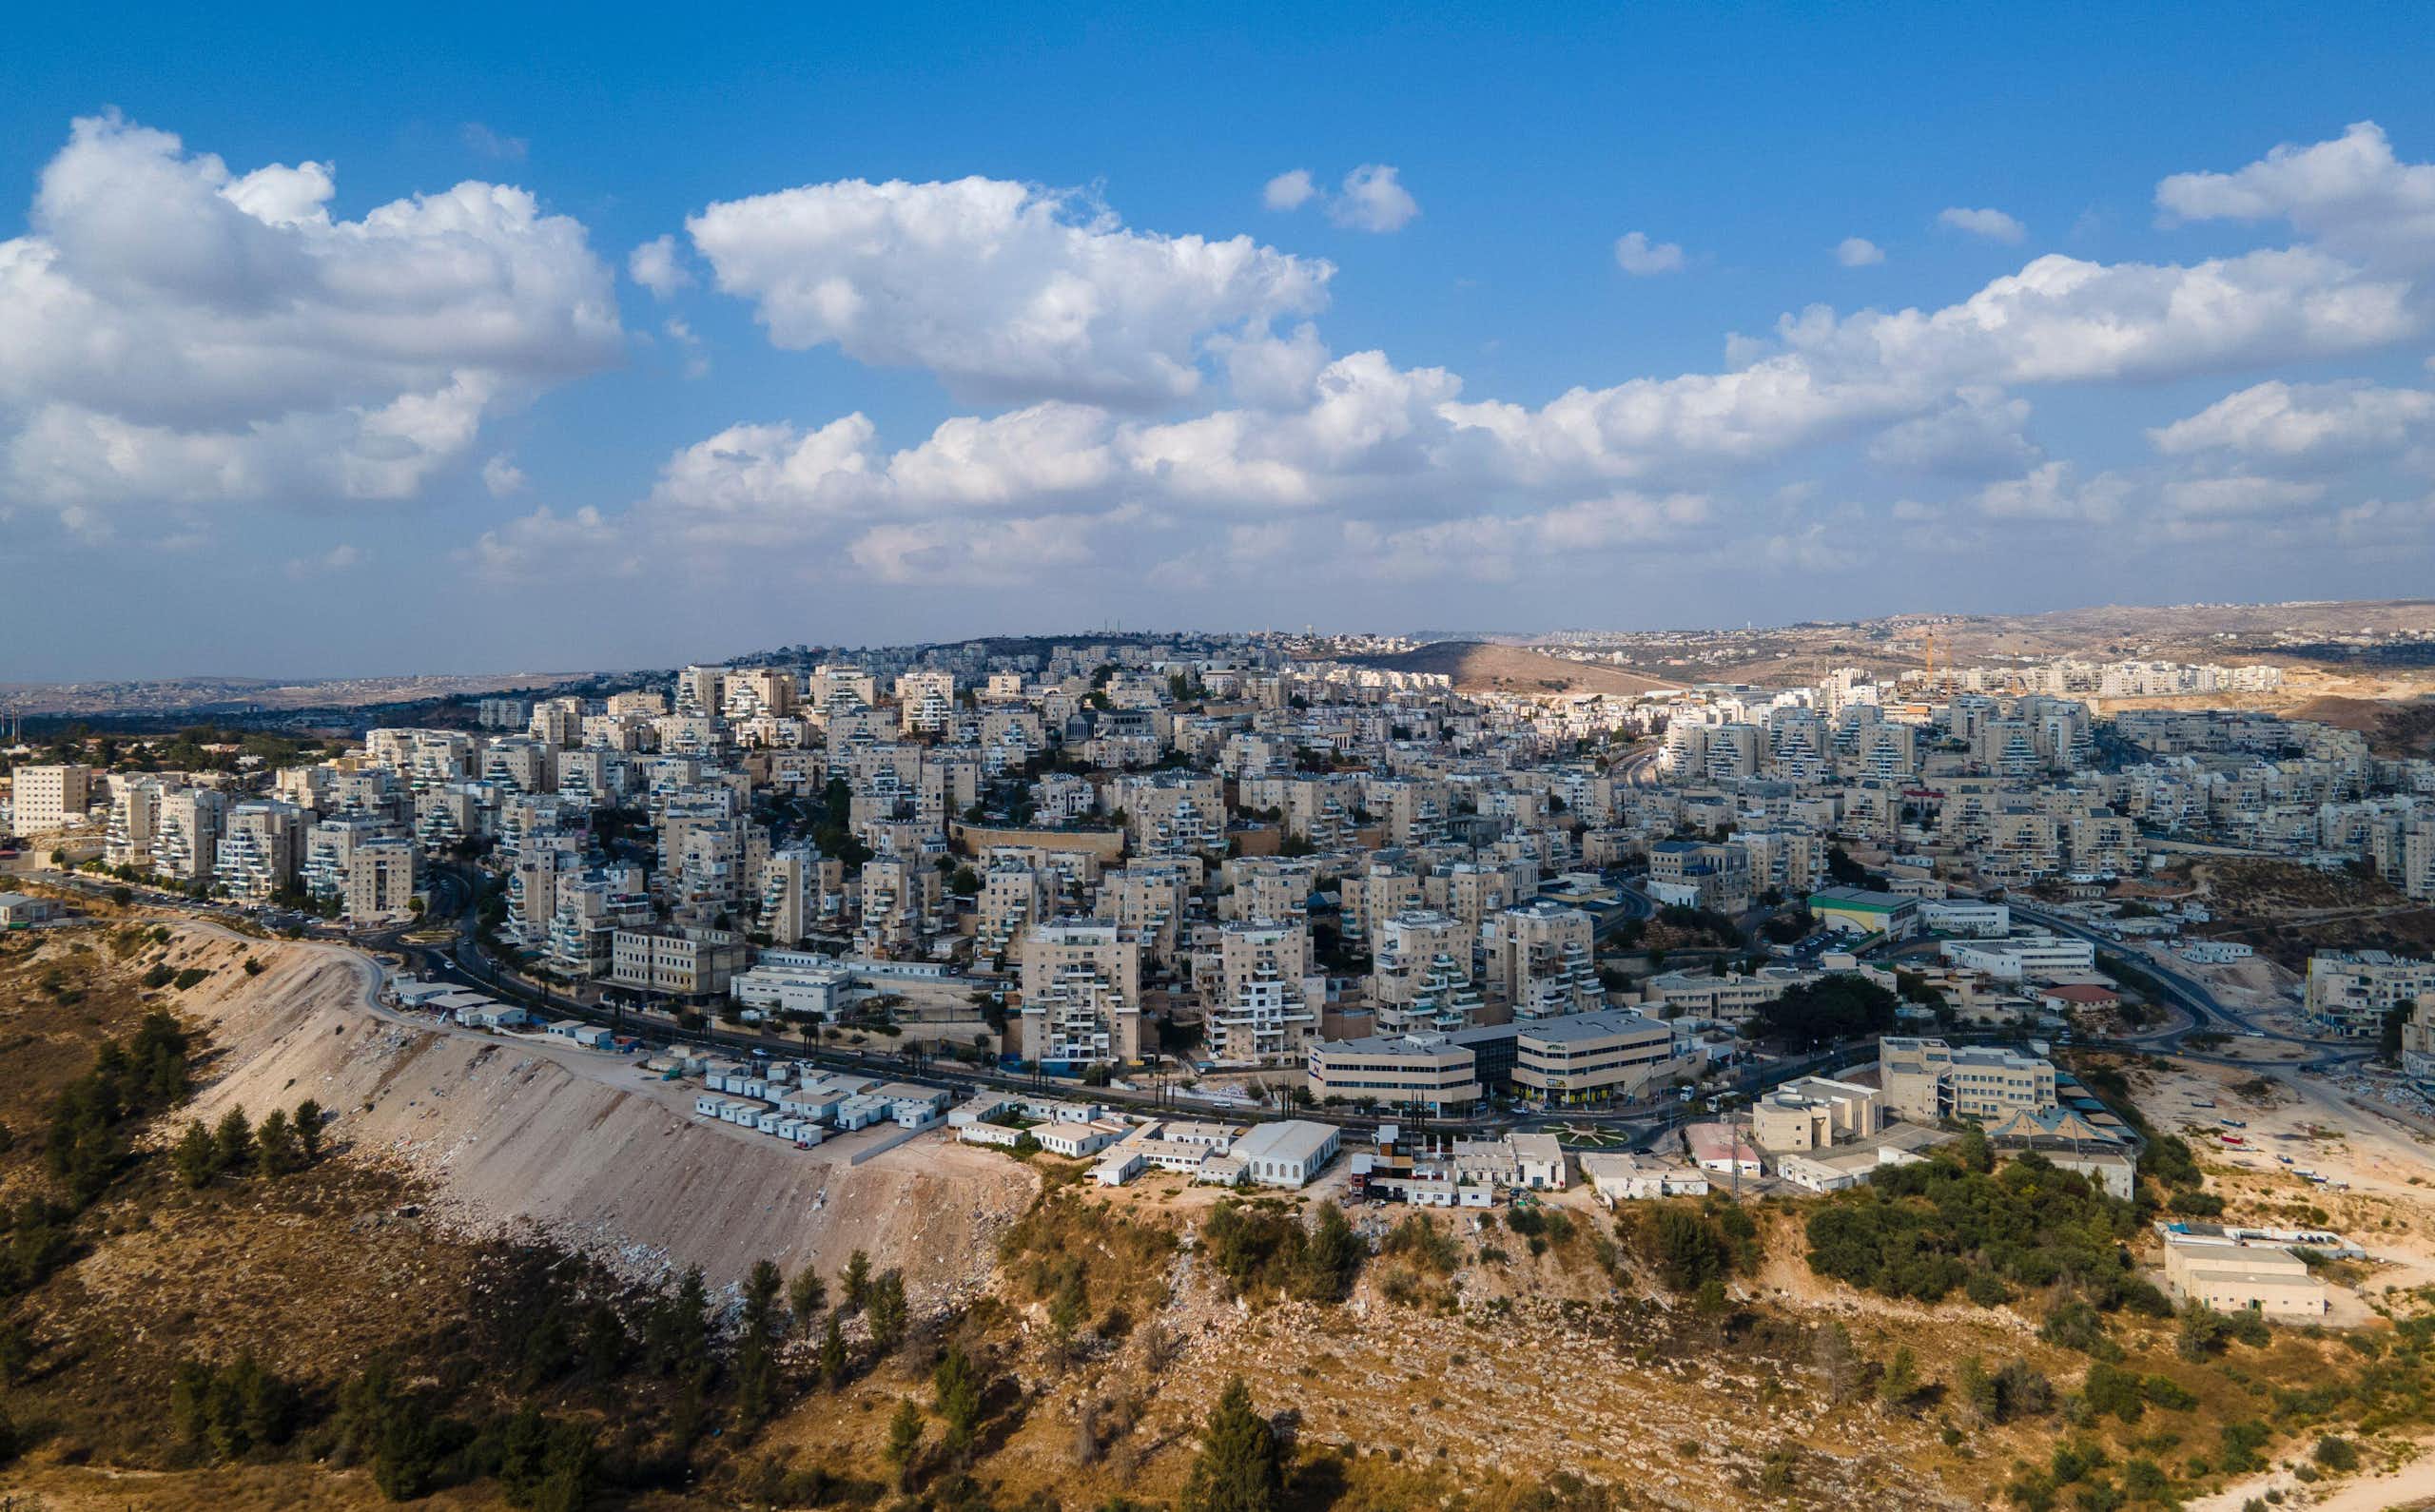 Tower blocks on a hill show the West Bank settlement of Modiin Ilit